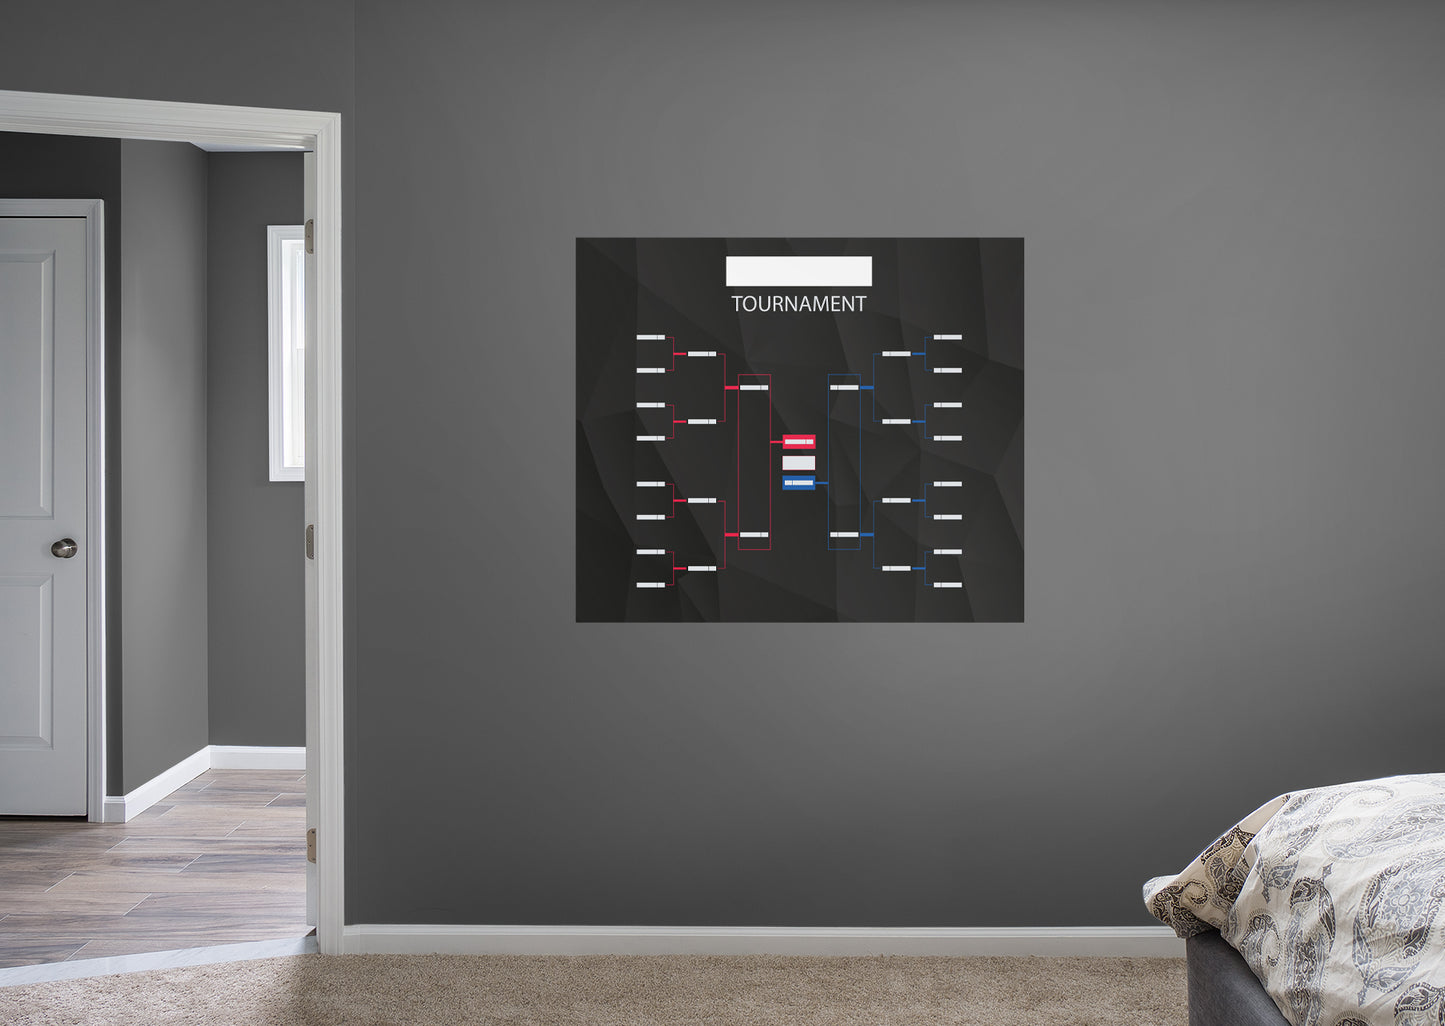 16 Team Dark Brackets Dry Erase        -   Removable Wall   Adhesive Decal